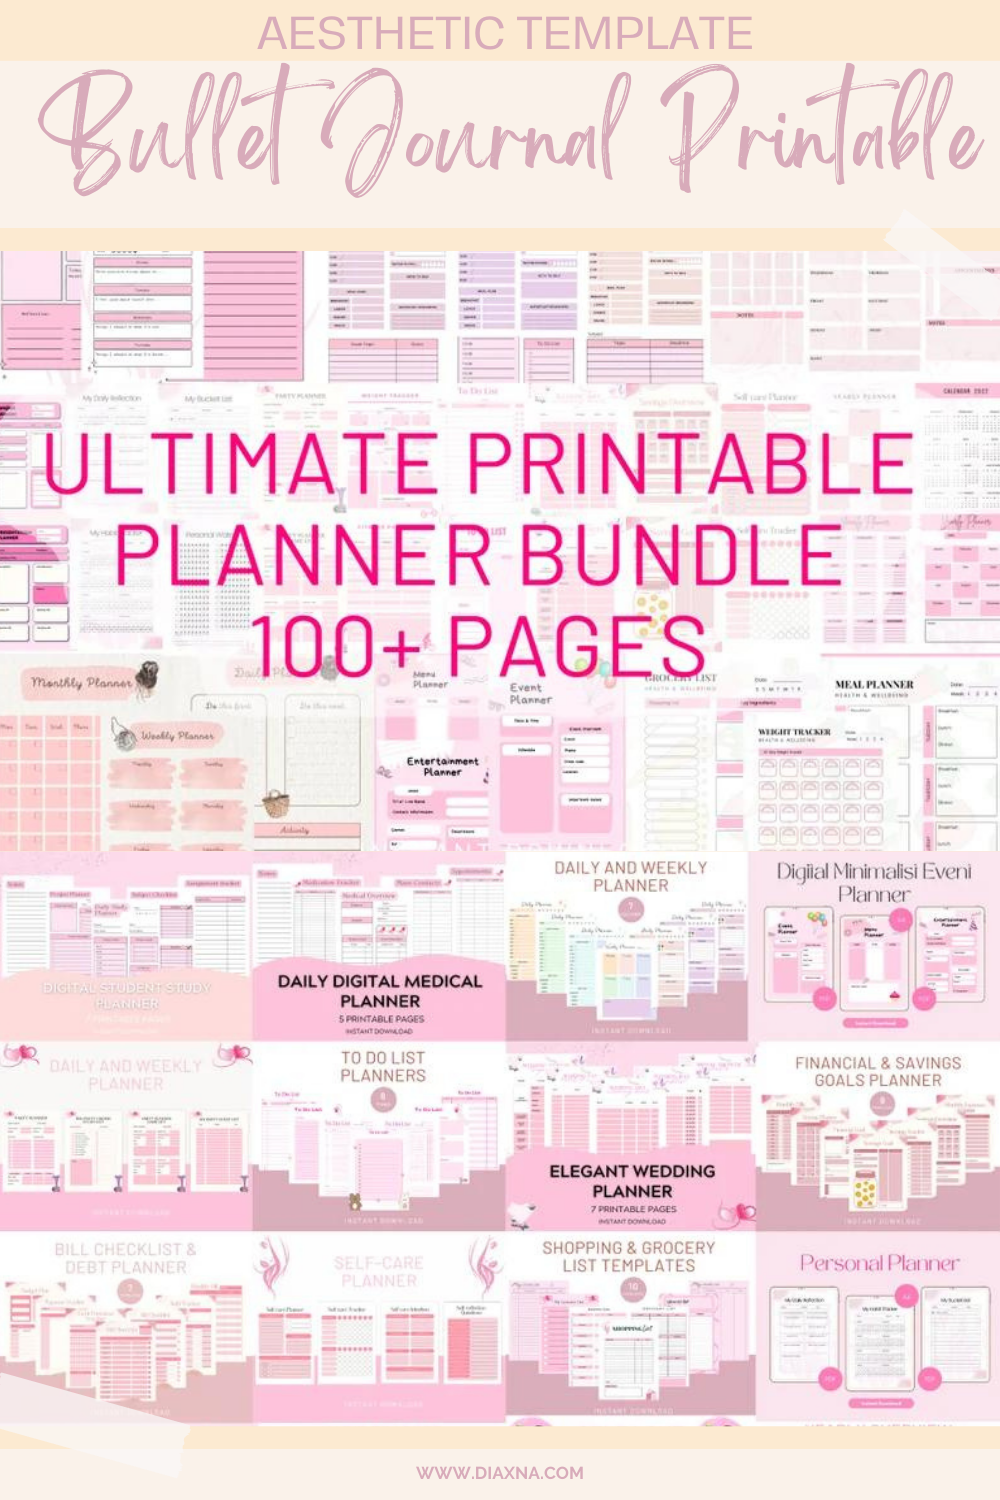 Study Planner - Planner and Bullet Journal Printable